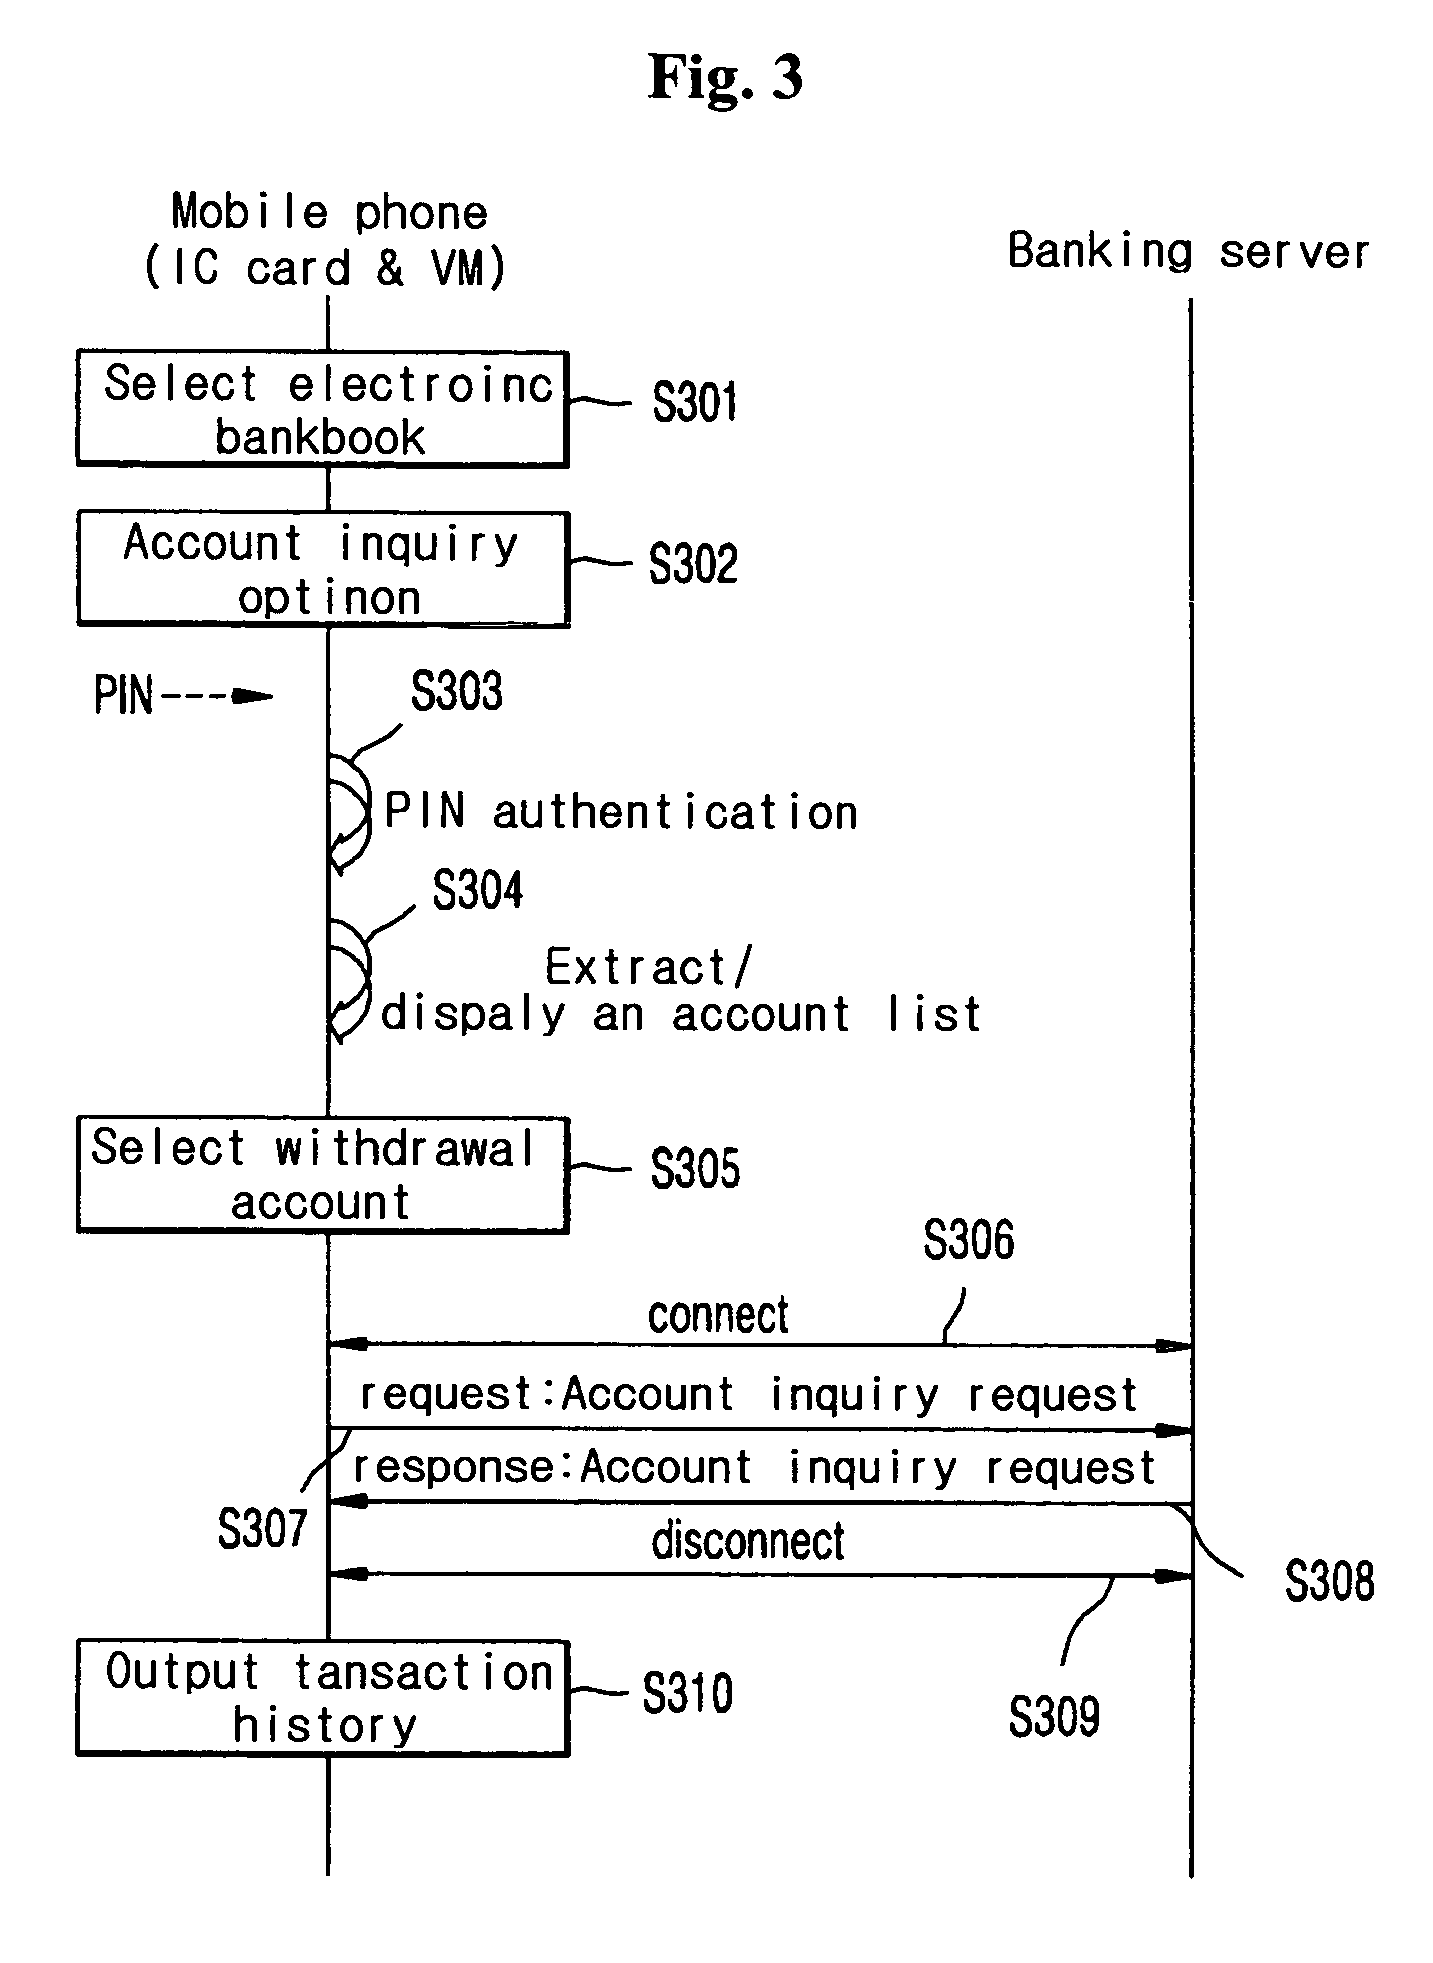 System for providing banking services by use of mobile communication